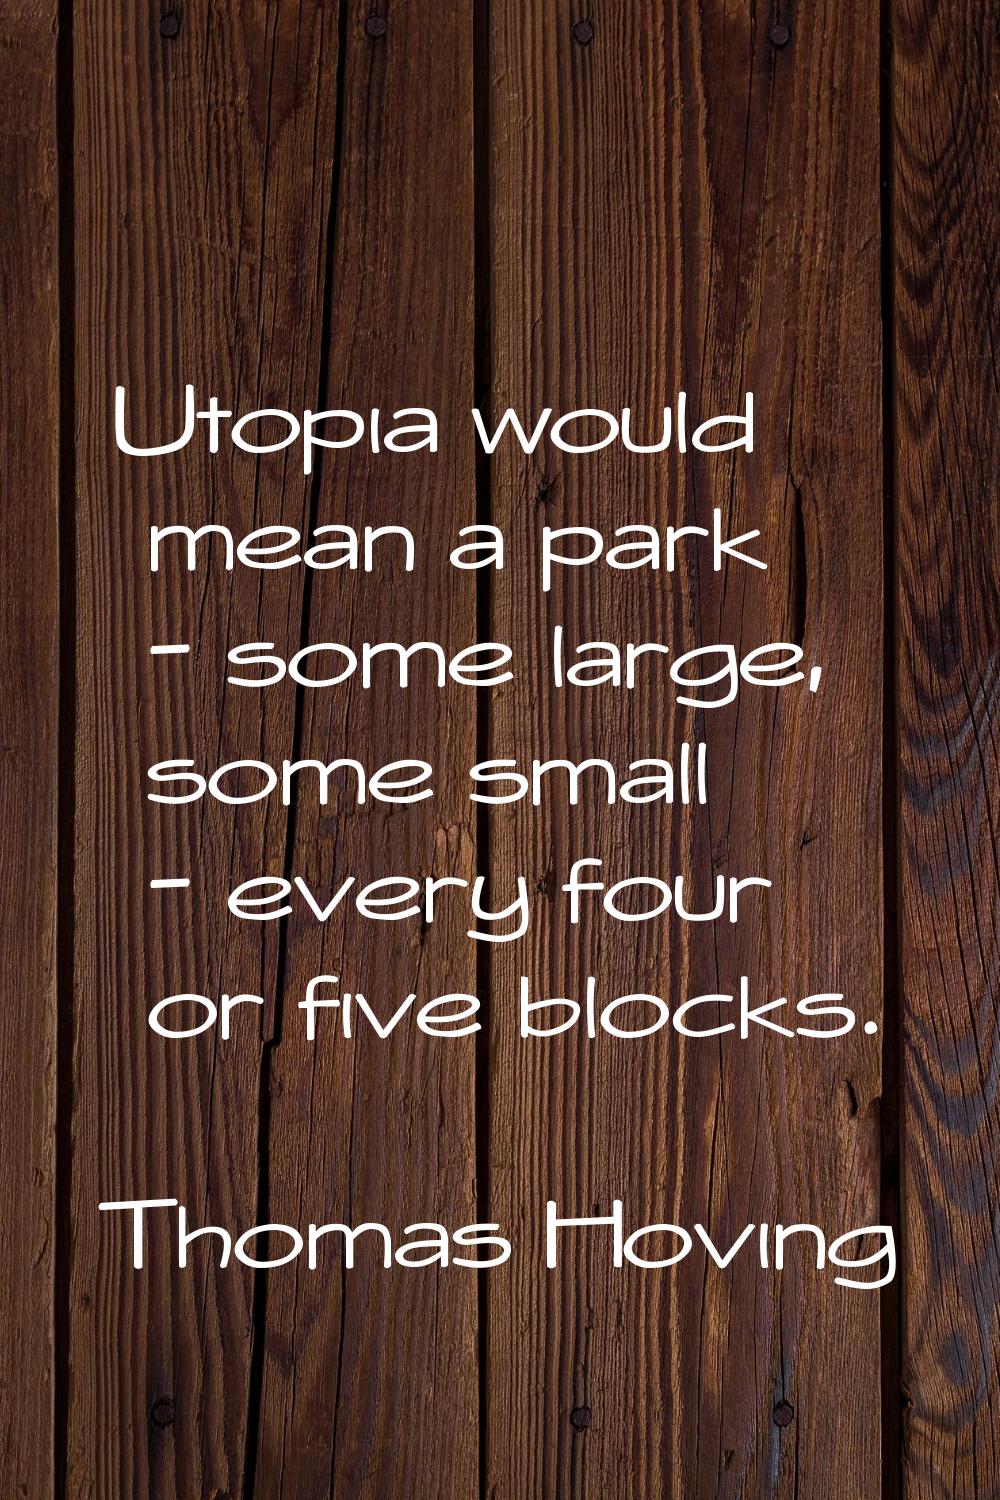 Utopia would mean a park - some large, some small - every four or five blocks.